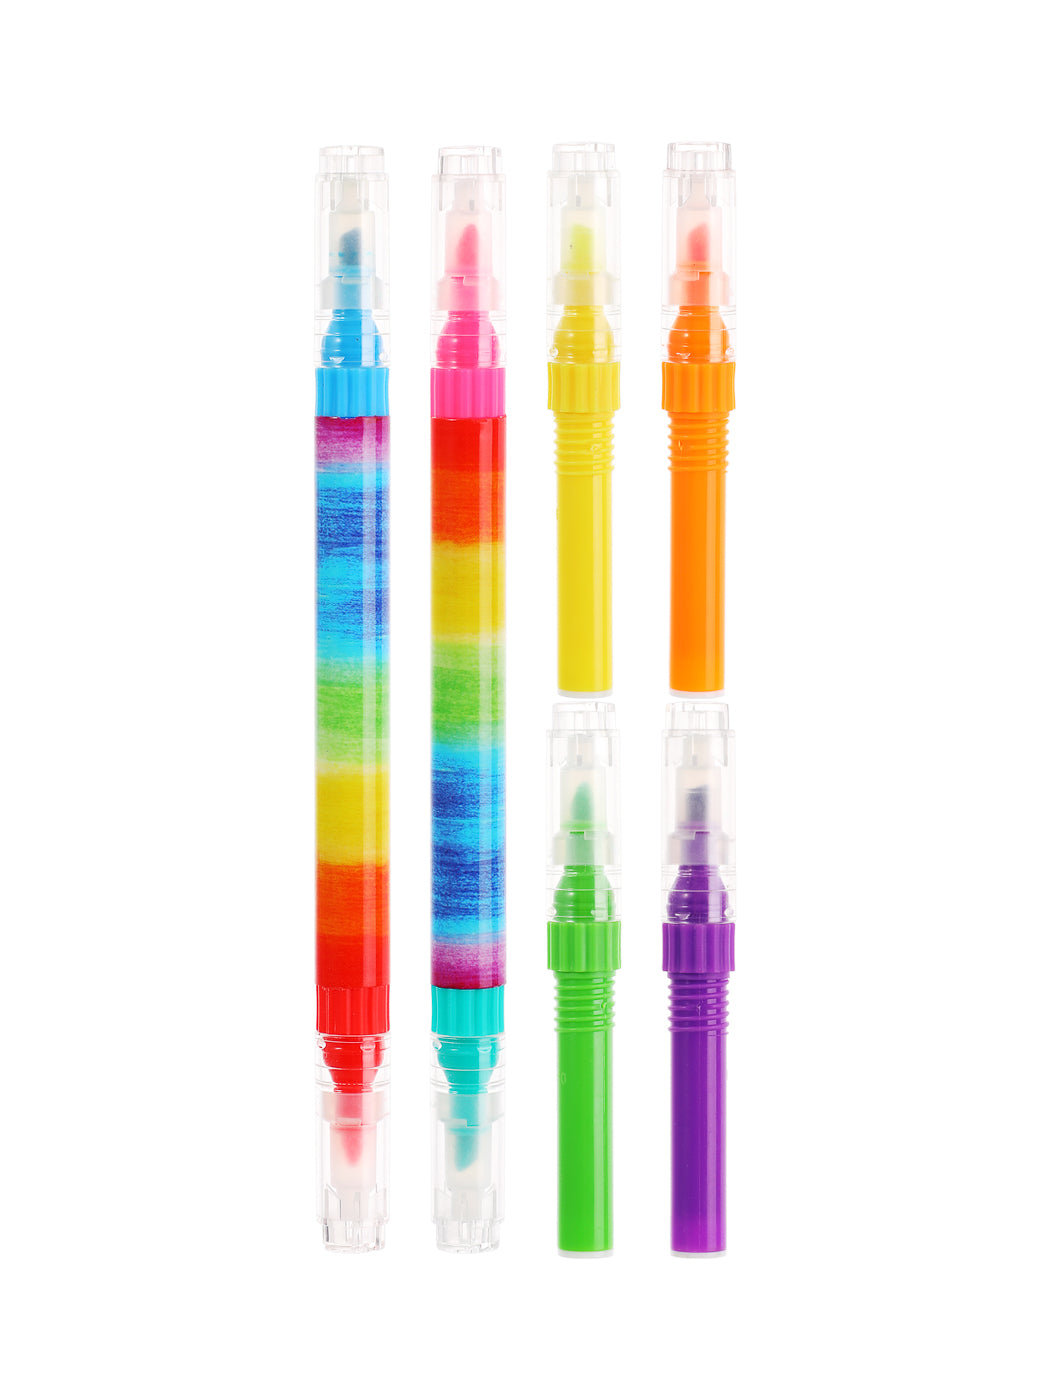 MINISO DOUBLE ENDED REFILLABLE FLUORESCENT HIGHLIGHTER (8 COLORS) 2010105910102 COLORED PENCIL